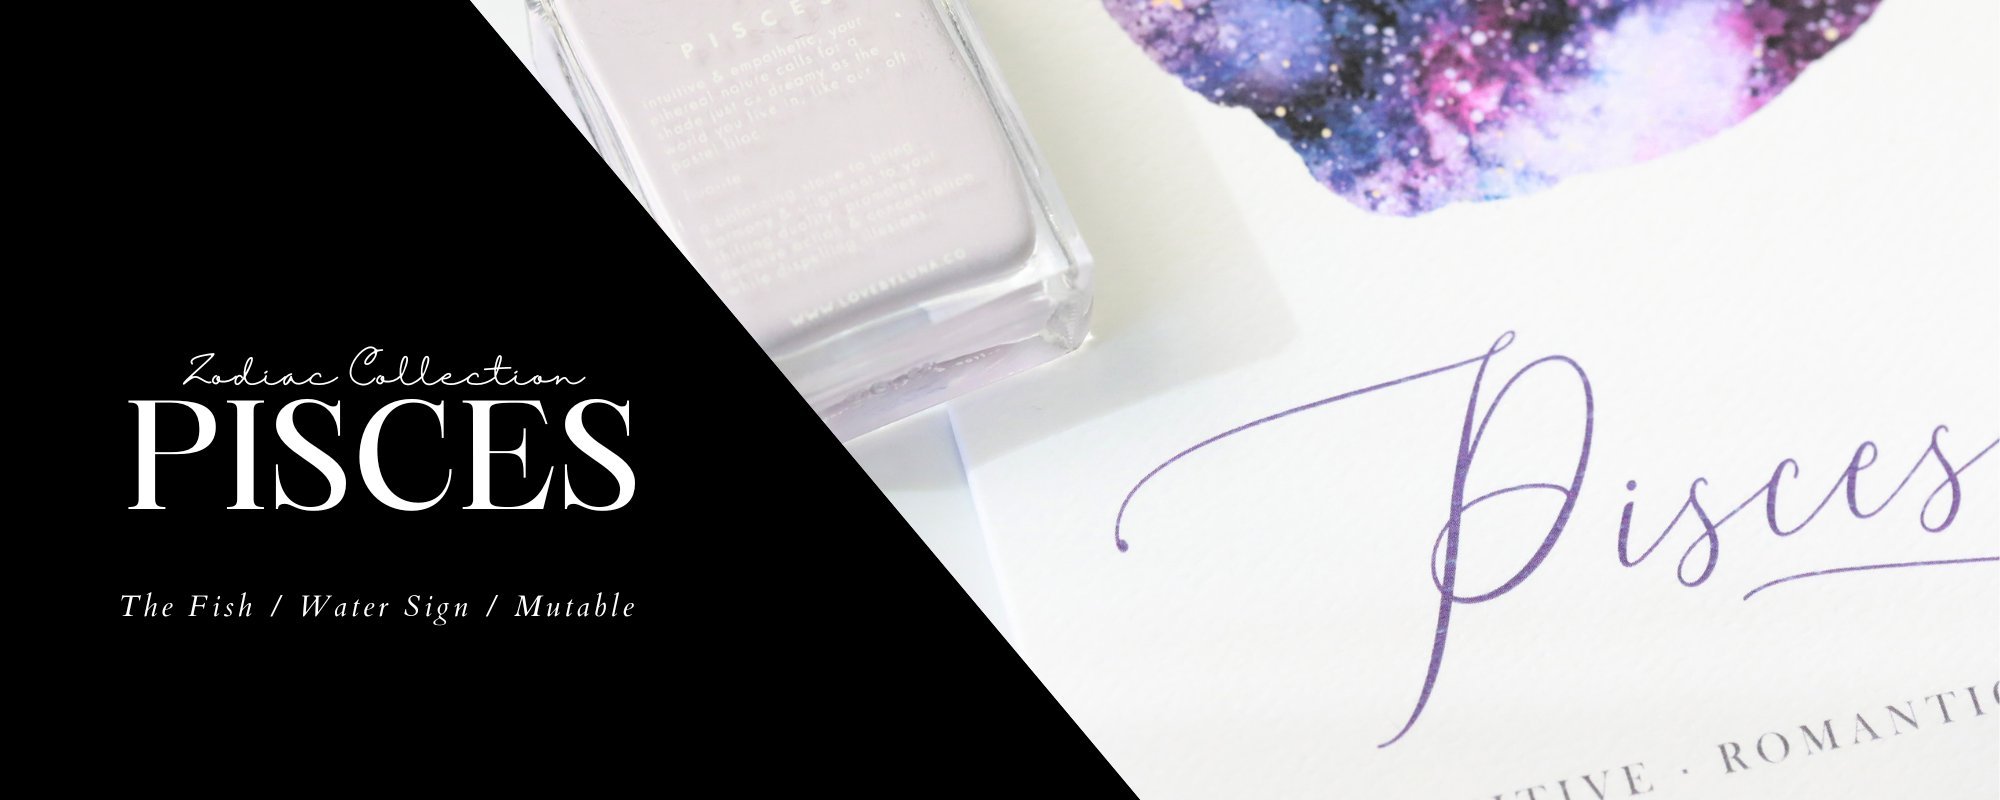 The pisces zodiac sign gift collection image header